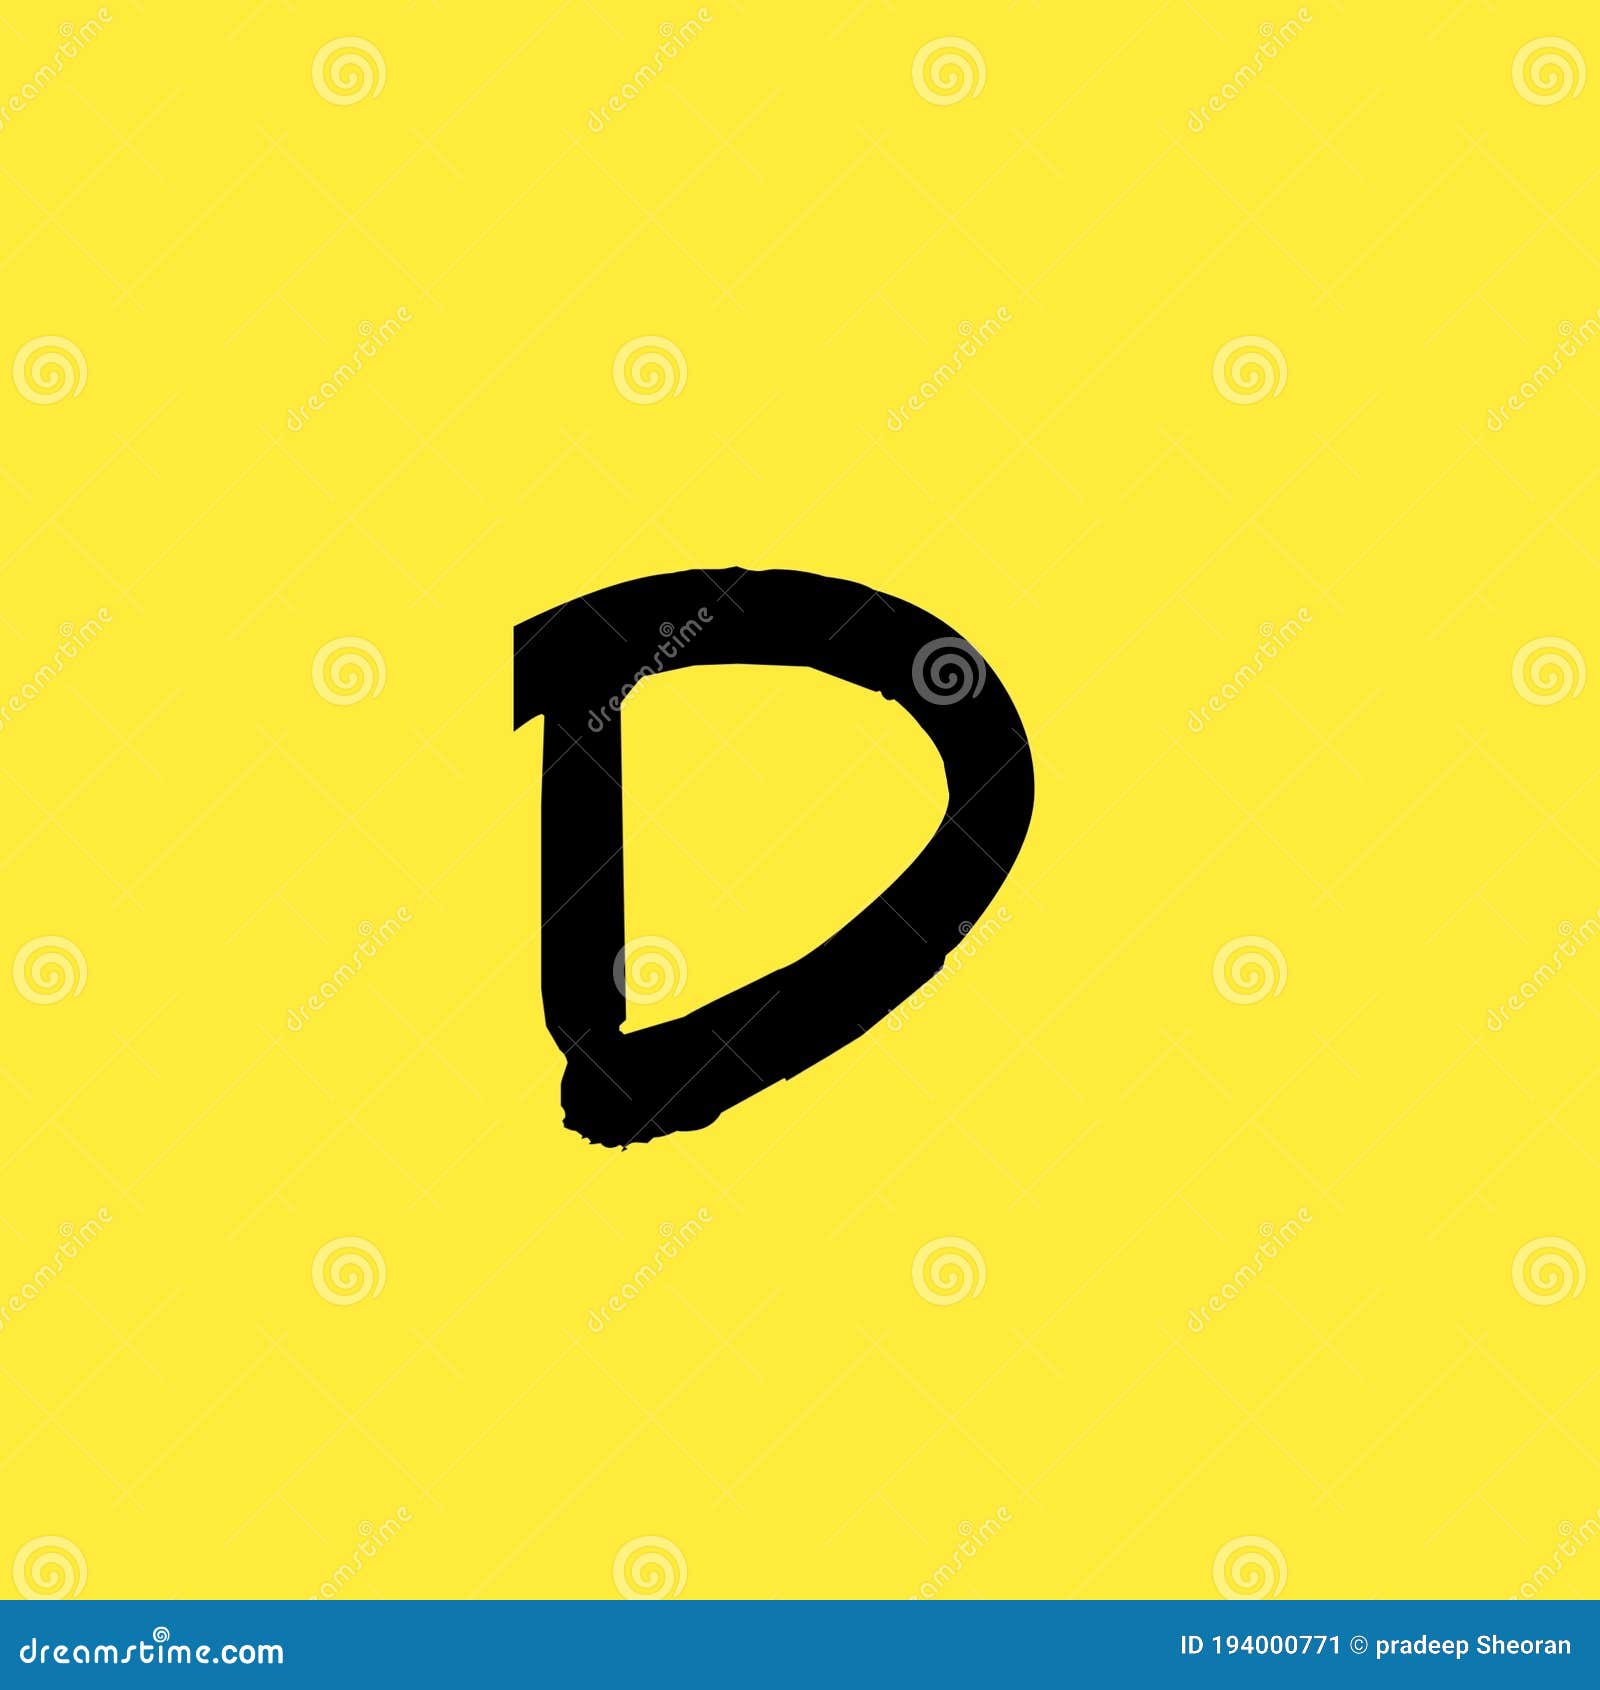 110 Letter D Wallpaper ideas  letter d letters and numbers wallpaper